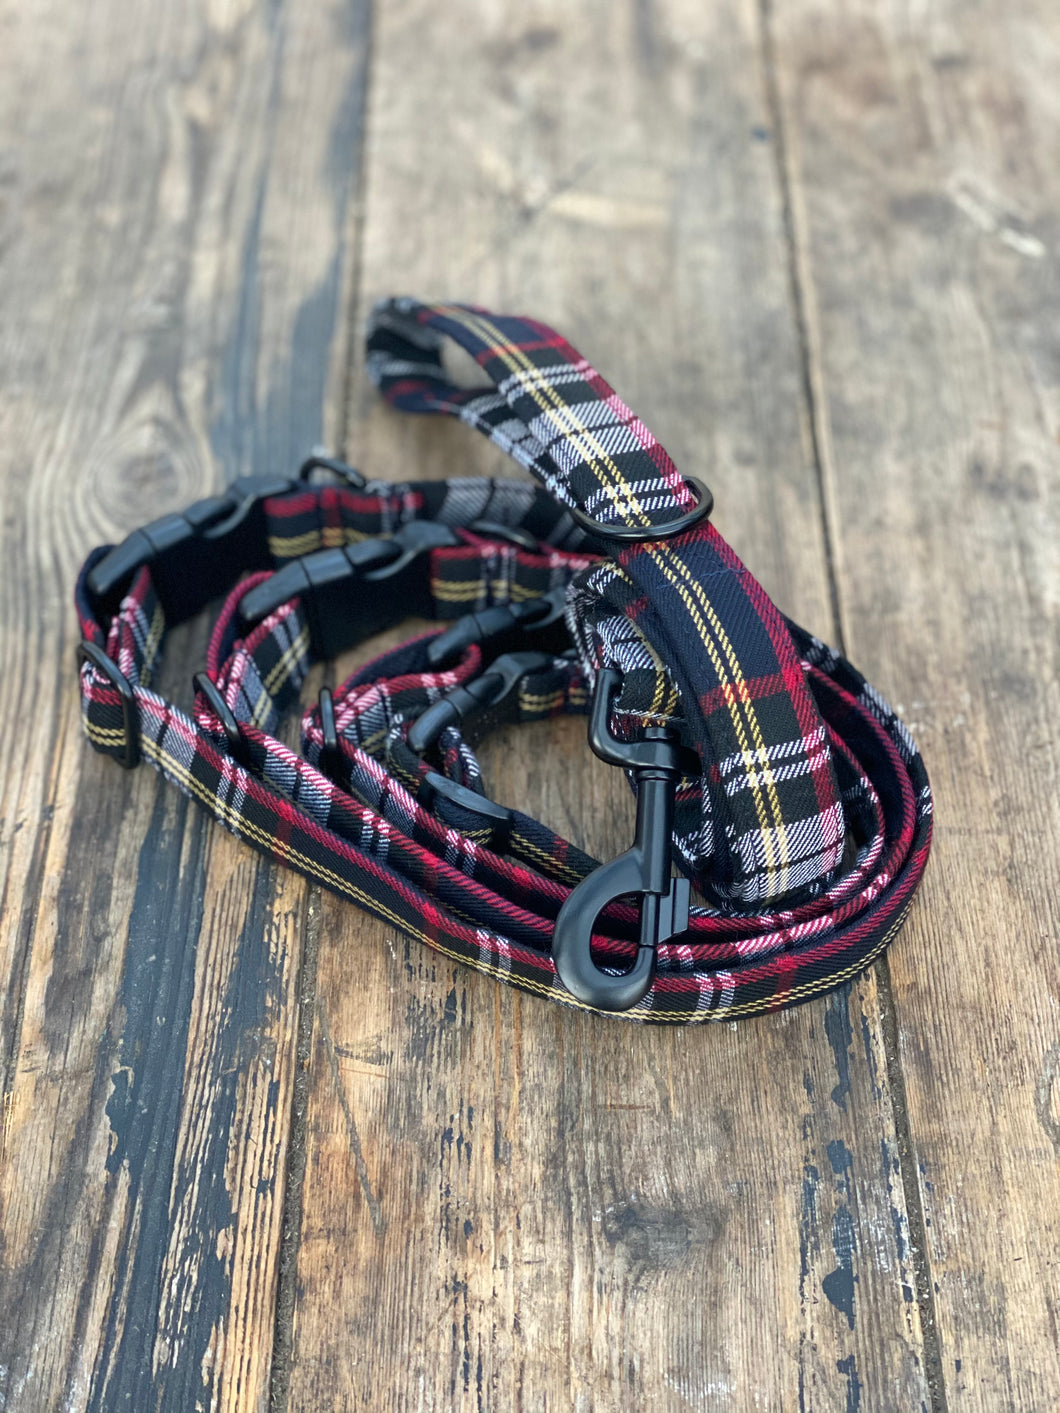 Classic tartan in navy/red/yellow & white (collar & leads)